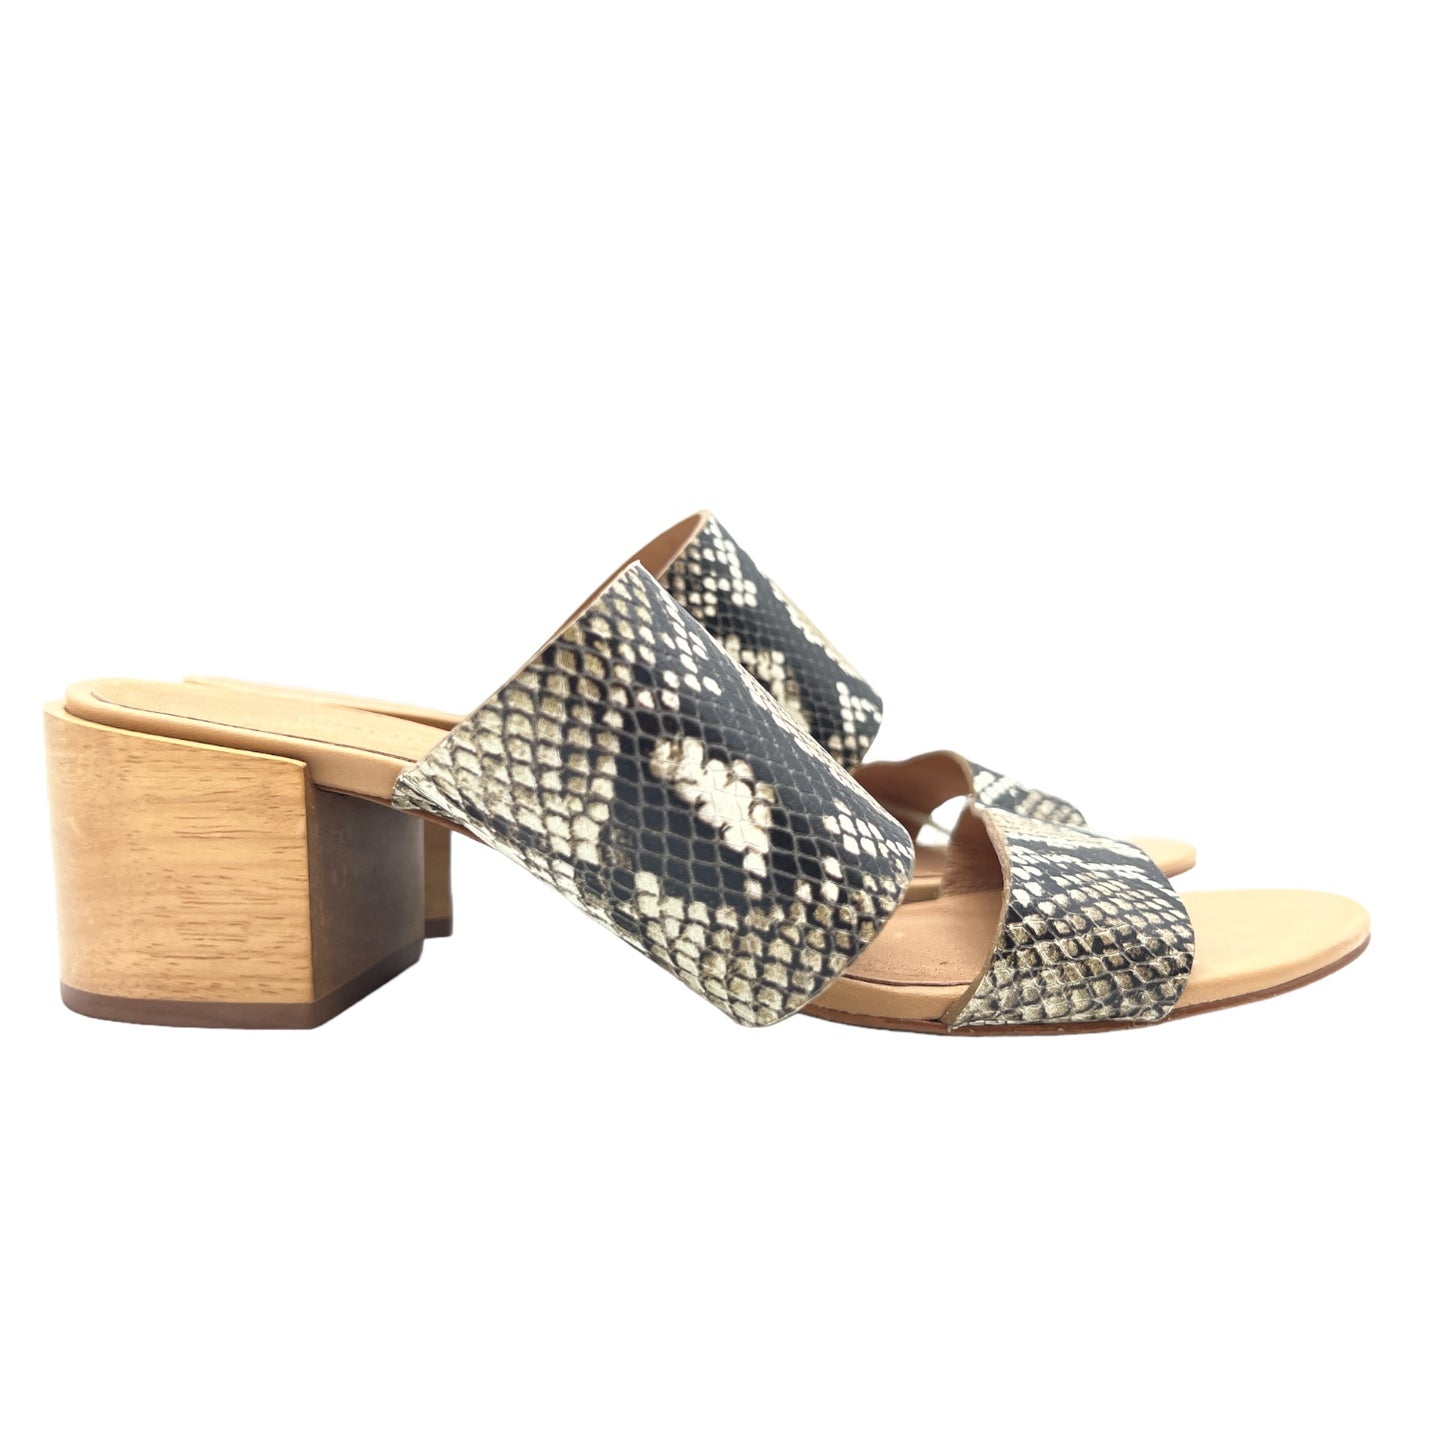 Sandals Heels Block By Madewell  Size: 9